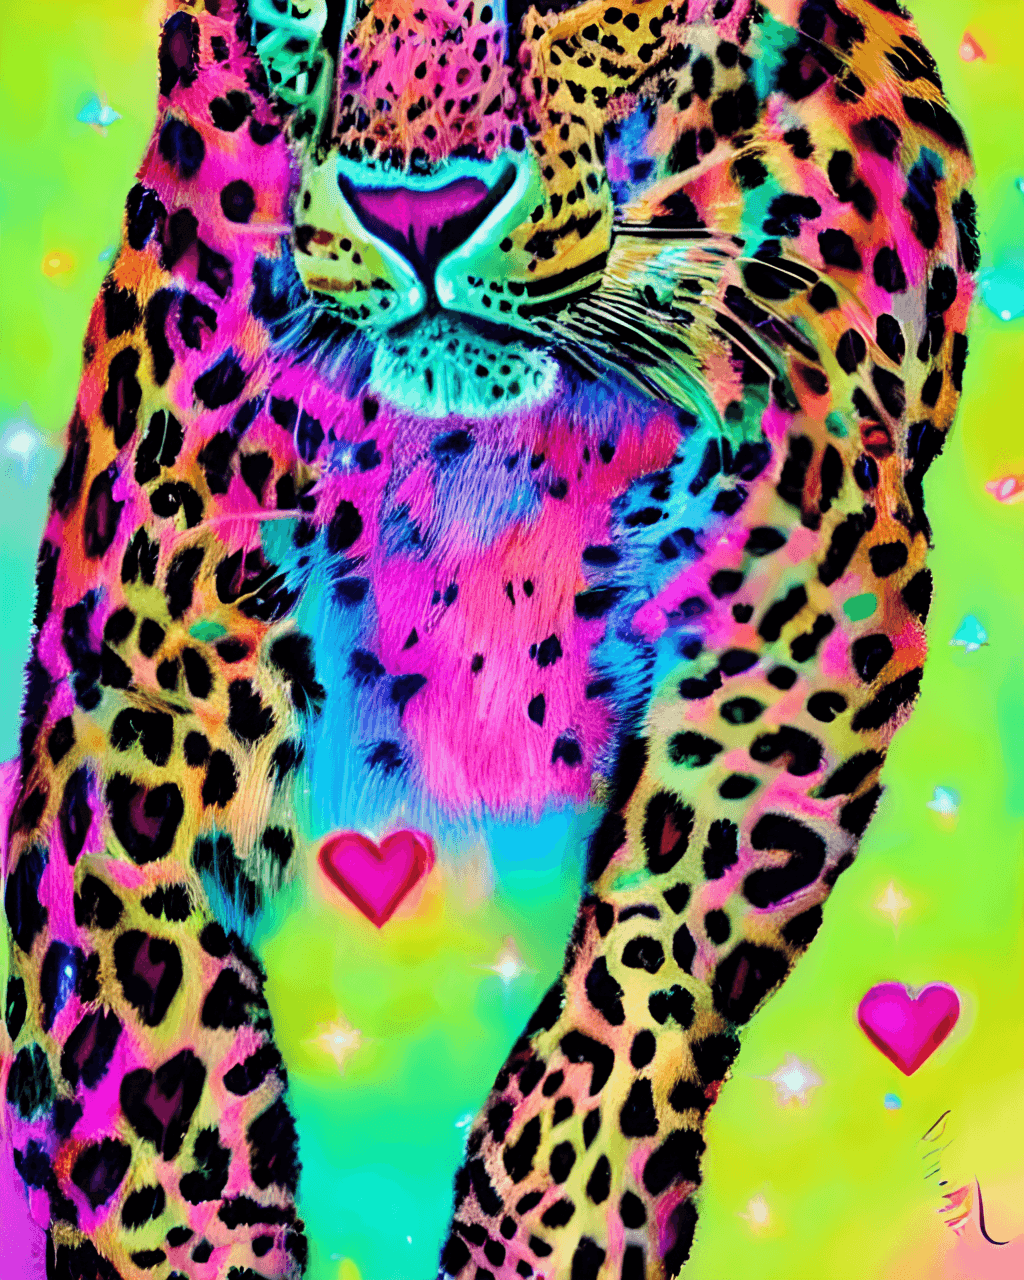 https://www.creativefabrica.com/wp-content/uploads/2023/01/27/A-Sparkly-Neon-Rainbow-Leopard-Painting-59055666-1.png